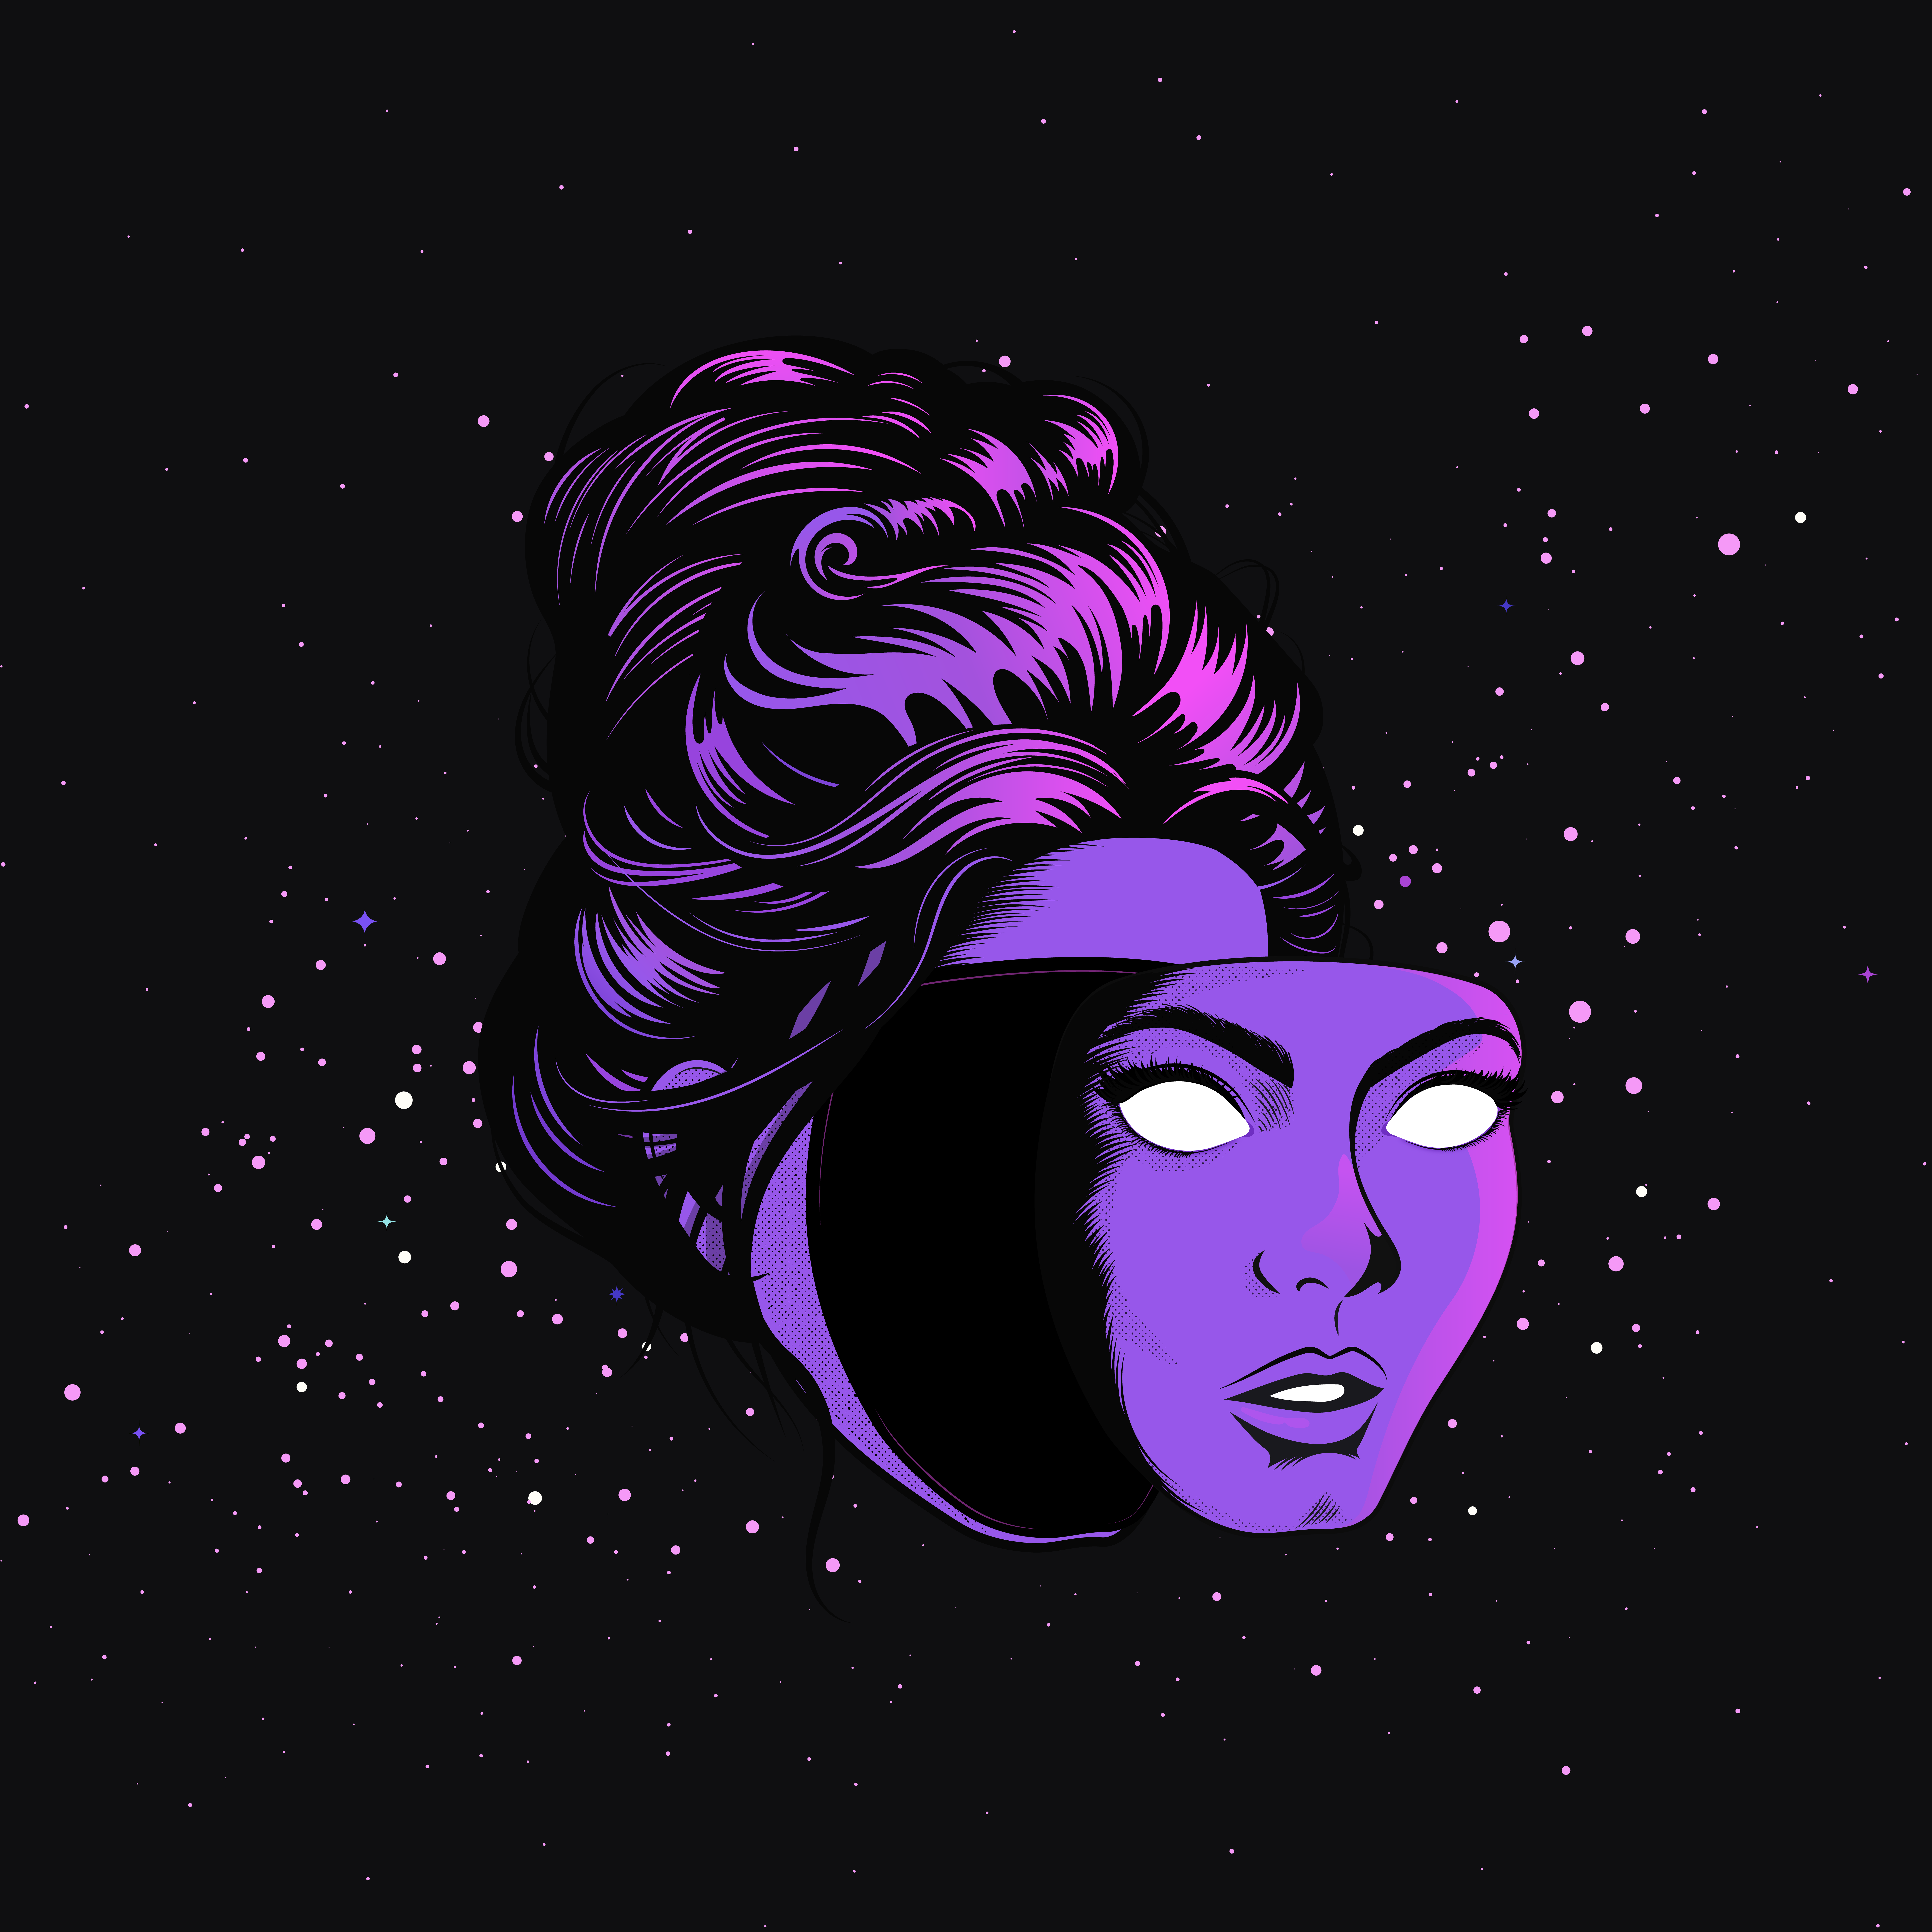 Thumbnail of a digital illustration I created of a woman's face in space.